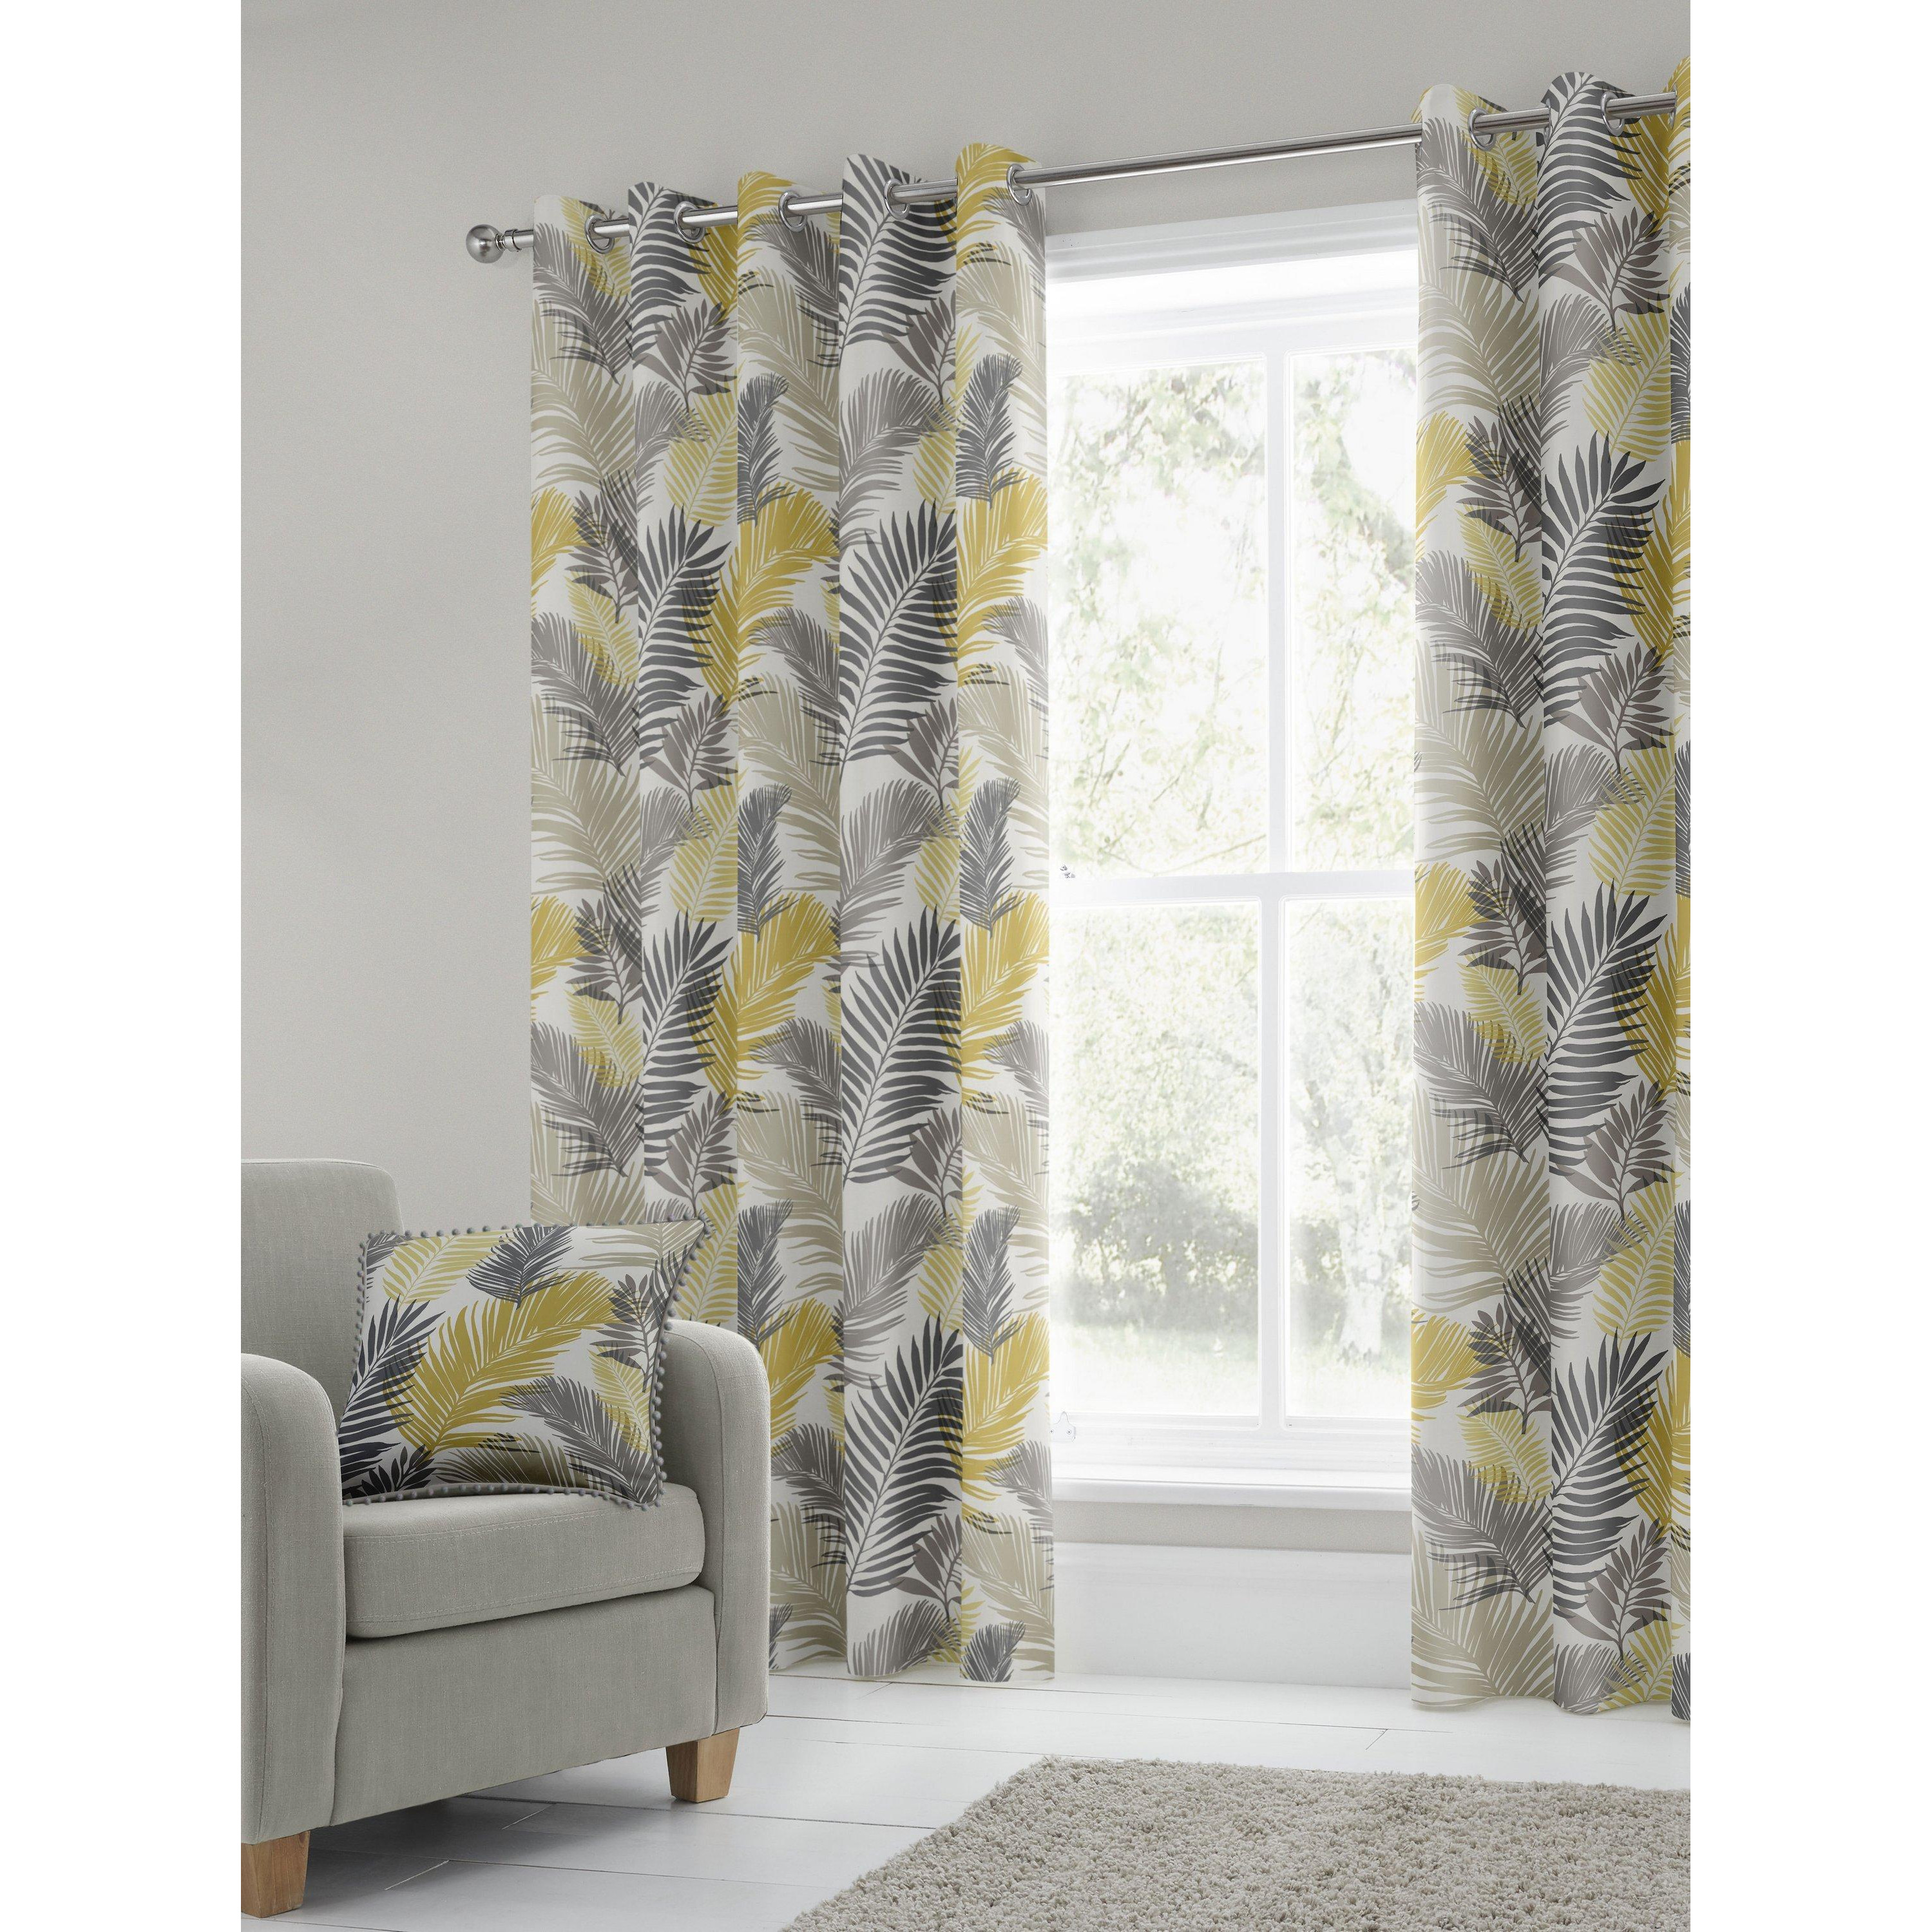 'Tropical' Exotic Palm Leaf Print 100% Cotton Eyelet Curtains - image 1